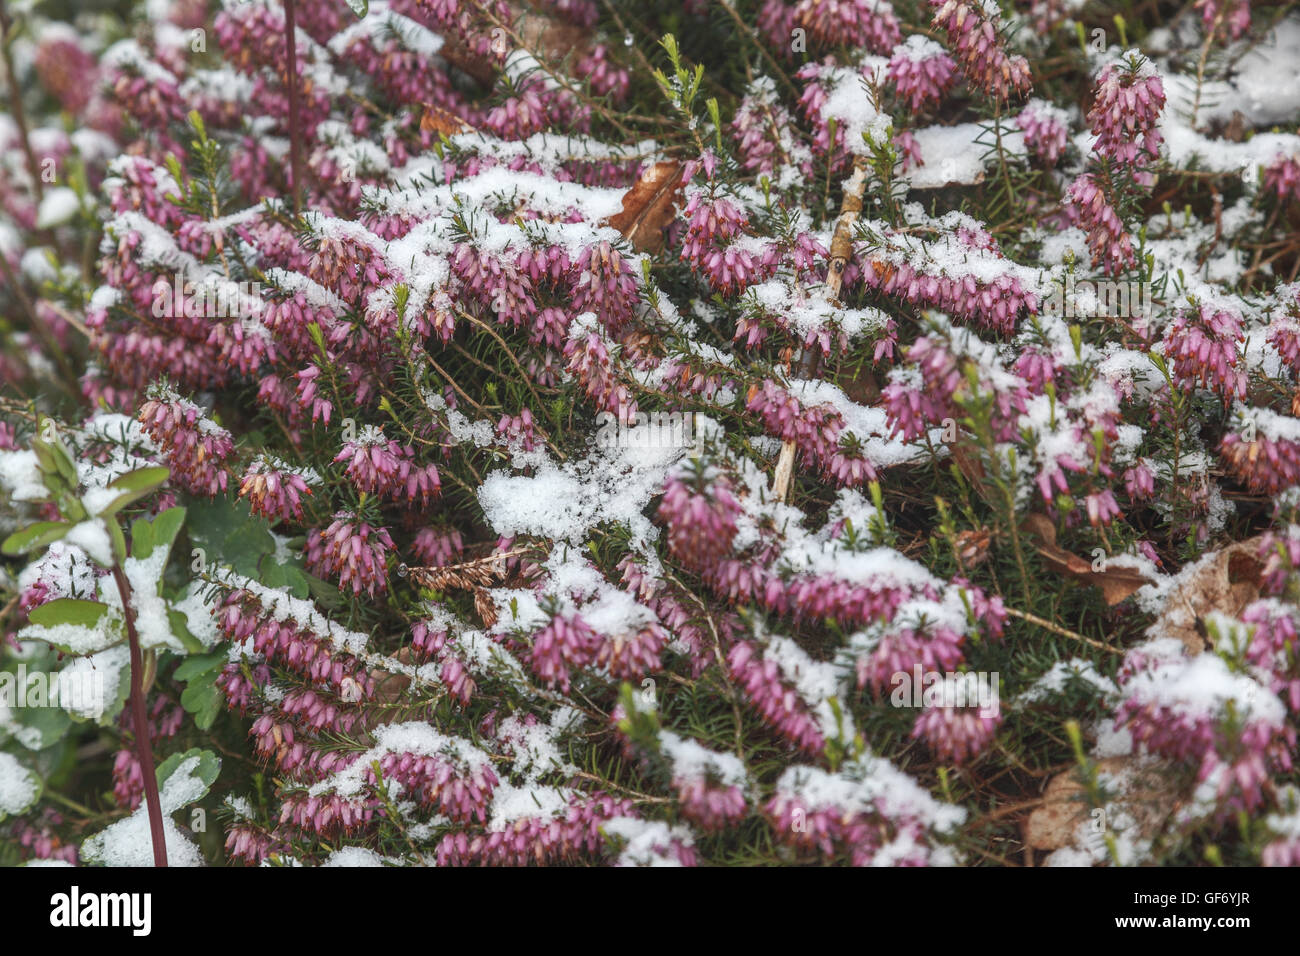 Red heather in flower and covered in late April snow, UK Stock Photo